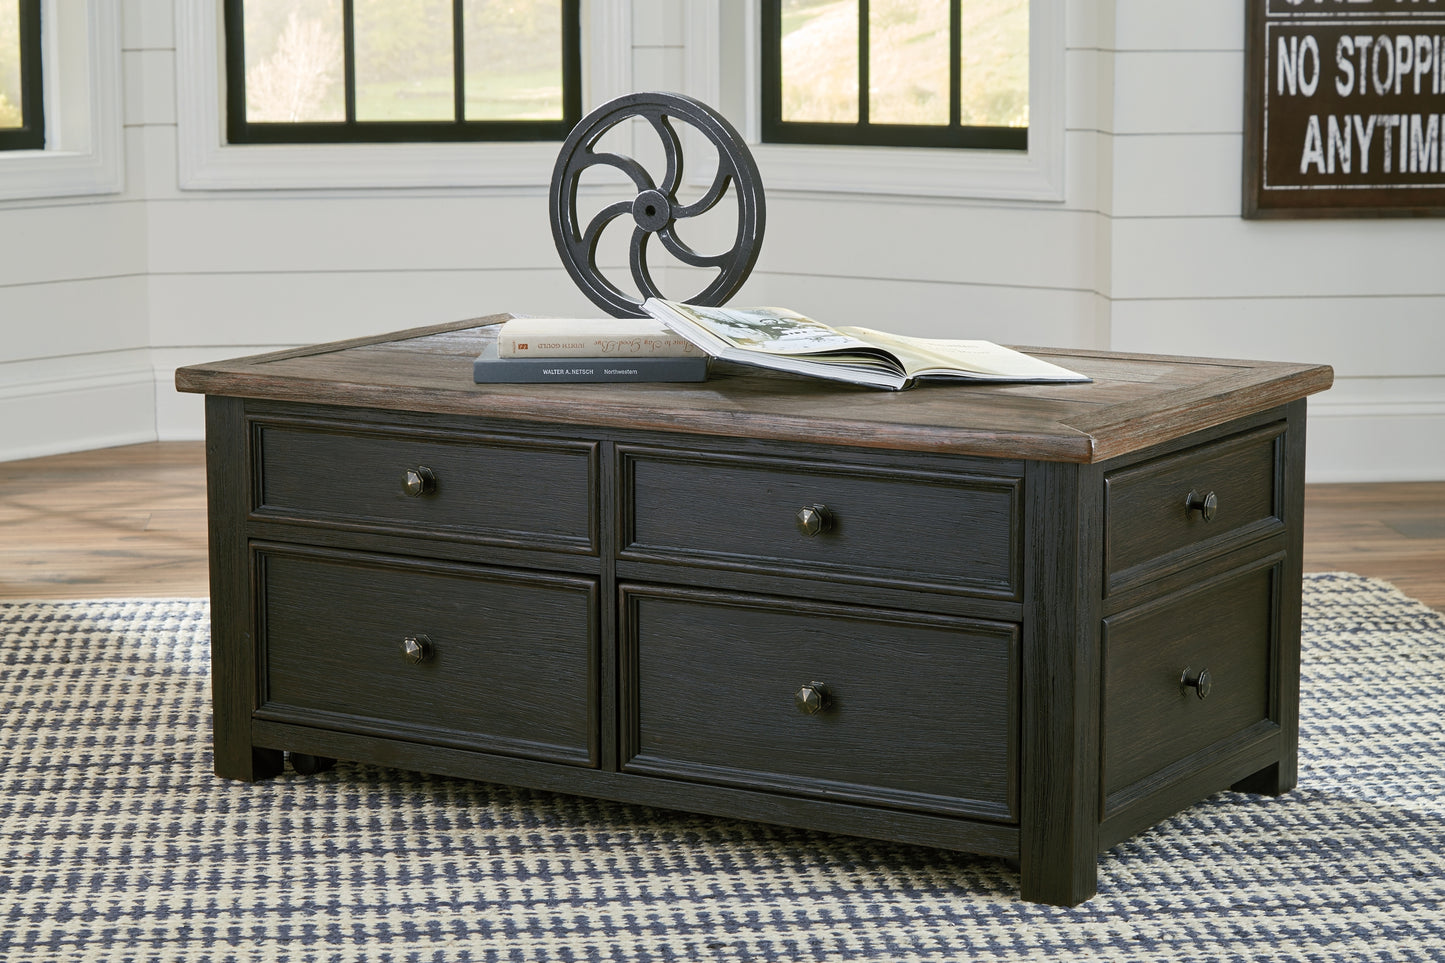 Ashley Express - Tyler Creek Coffee Table with 1 End Table